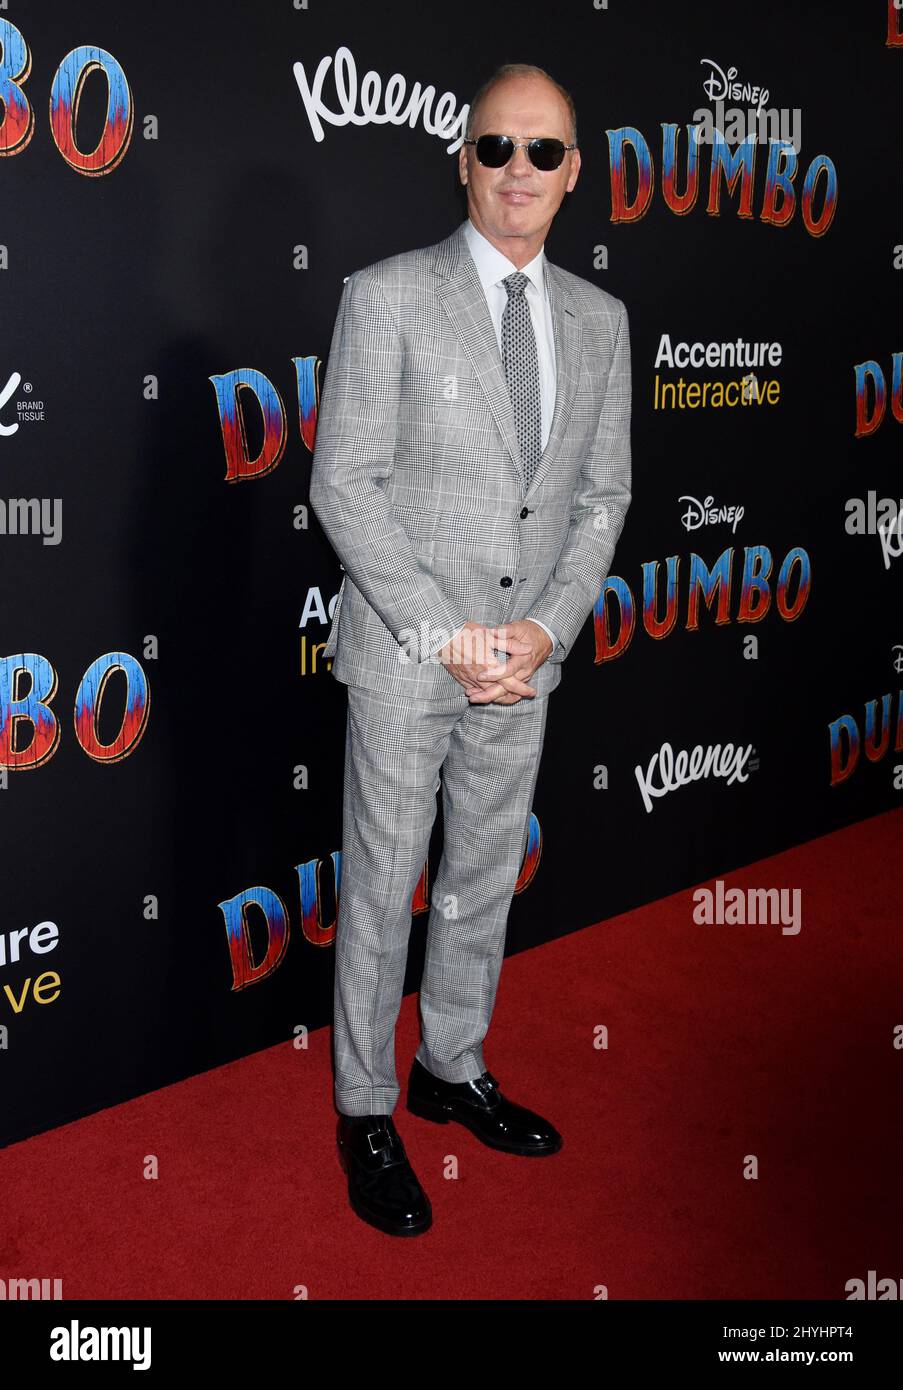 Michael Keaton arriving for Disney's premiere of 'Dumbo' held at the El Capitan Theatre on March 11, 2019 in Hollywood, Los Angeles. Stock Photo